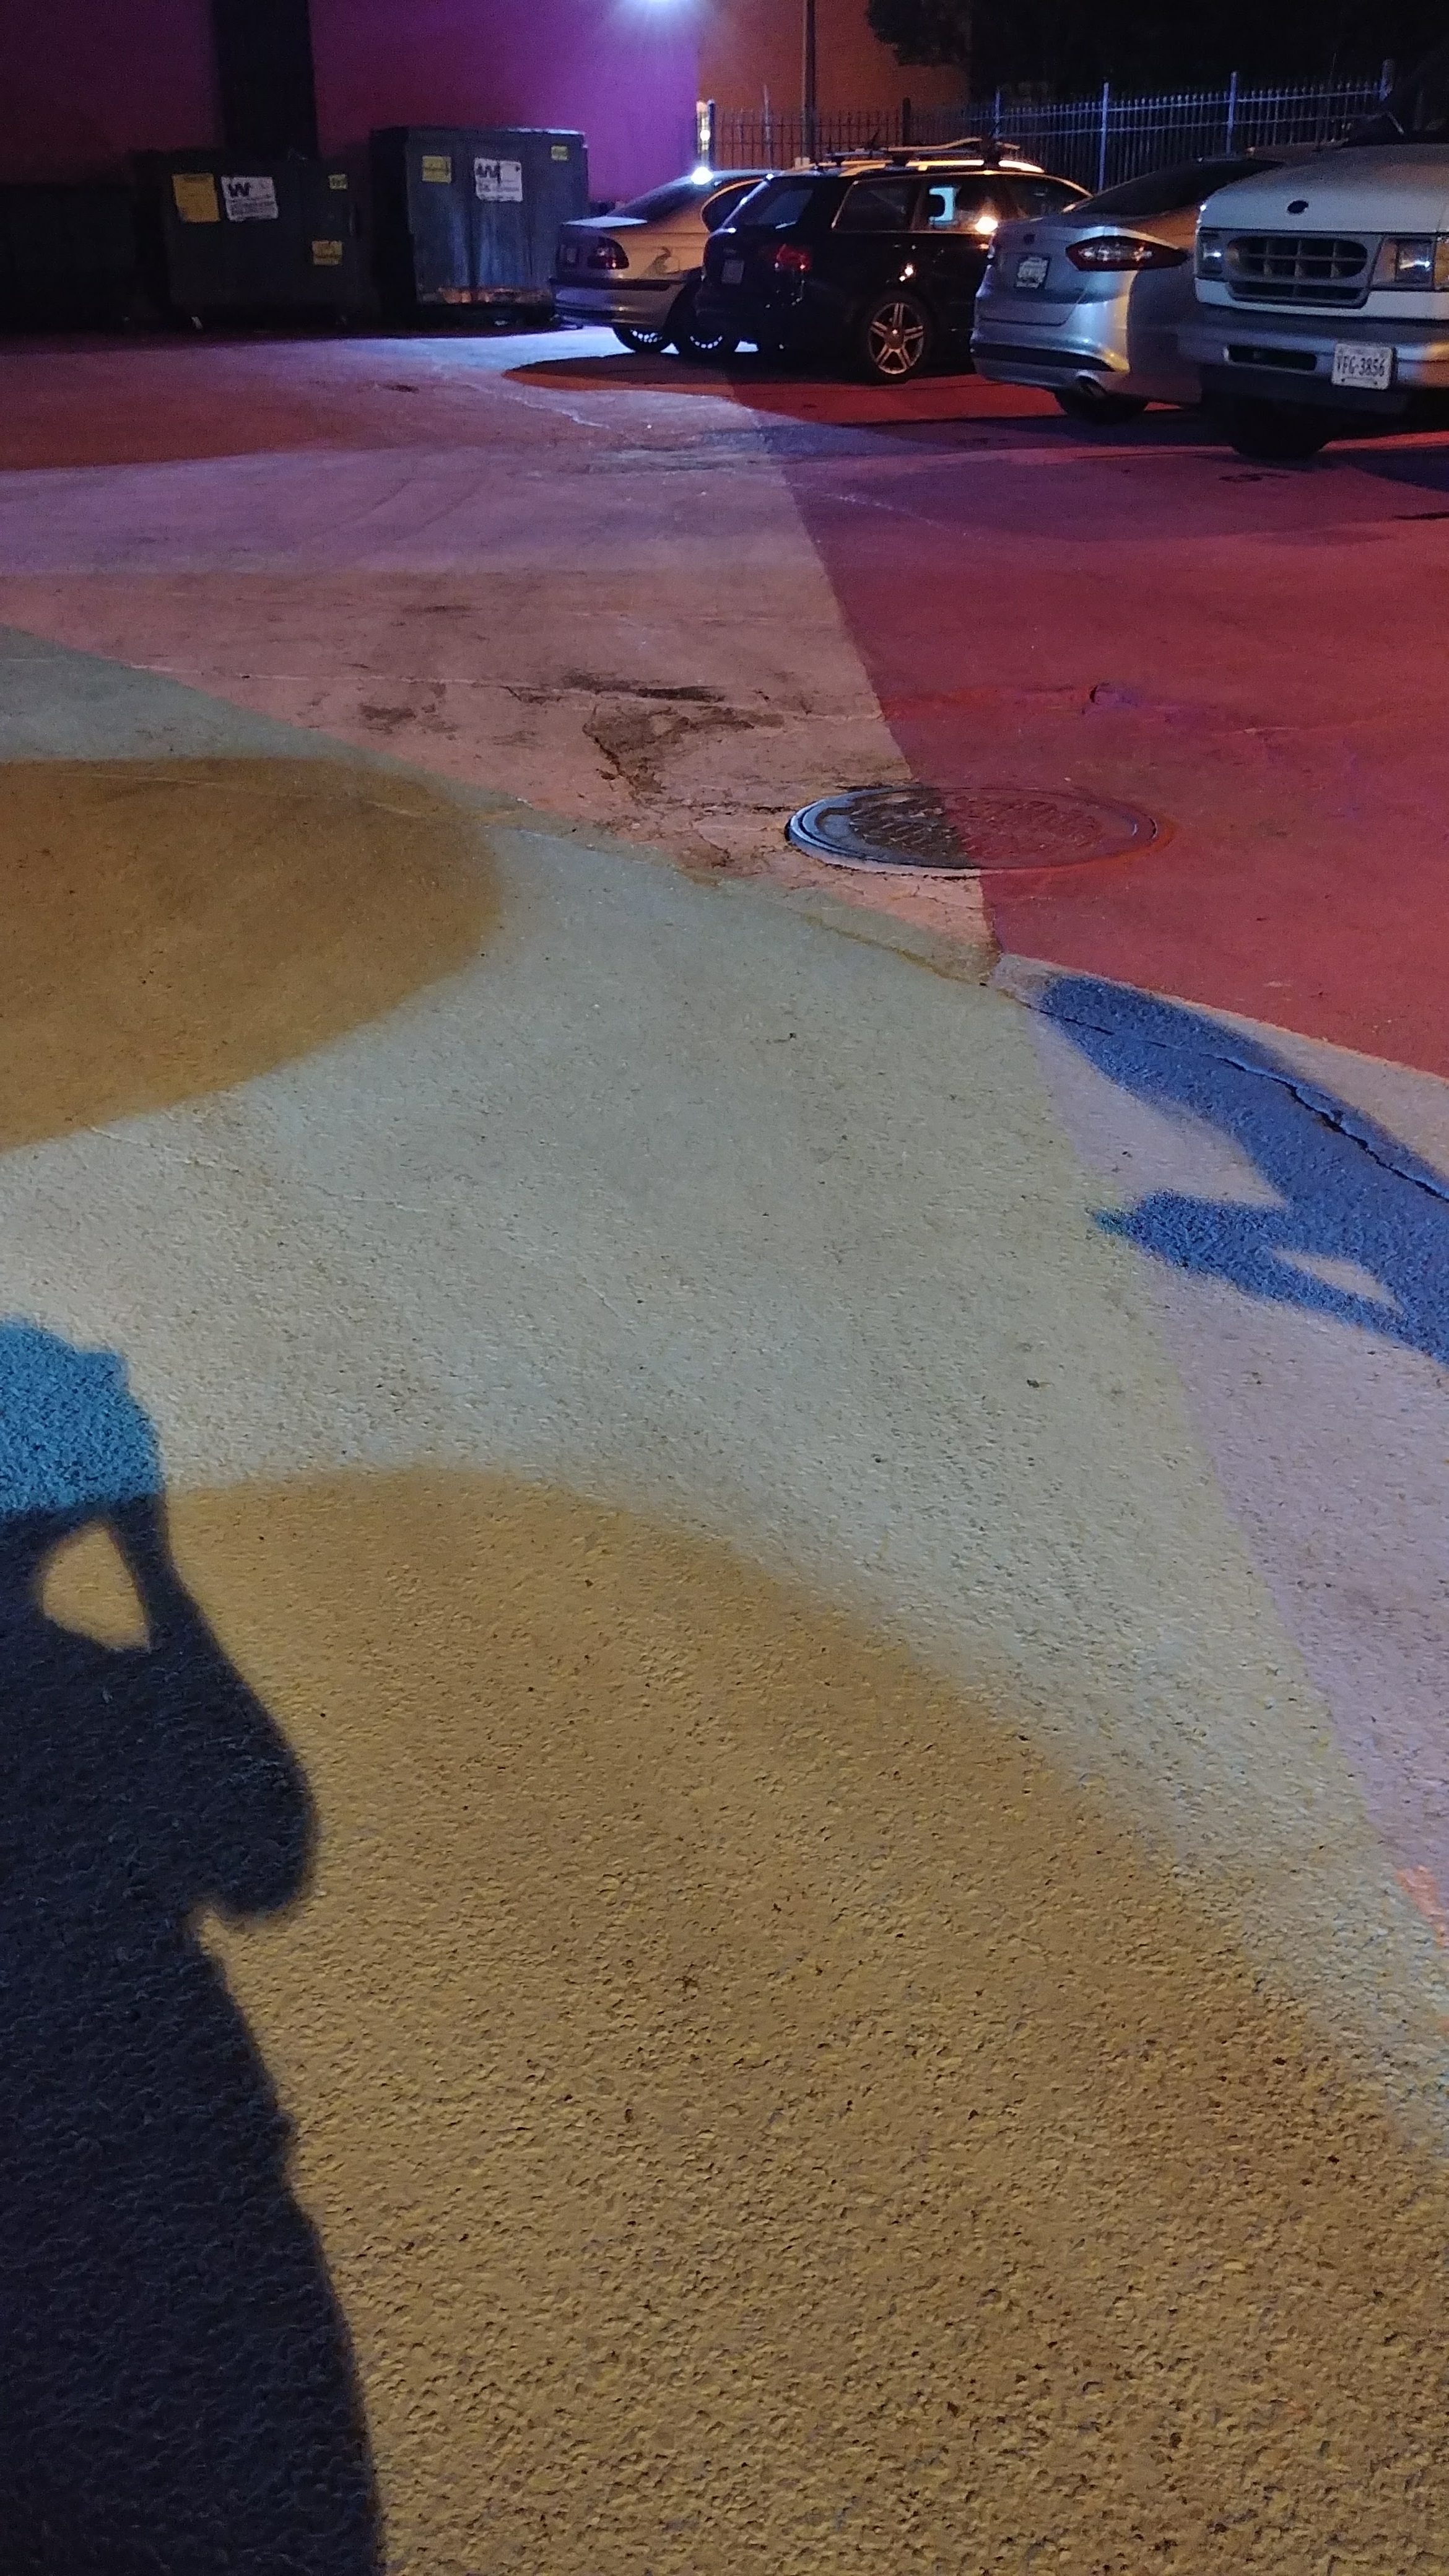  they also painted on the ground and it was very pretty in the shadows 